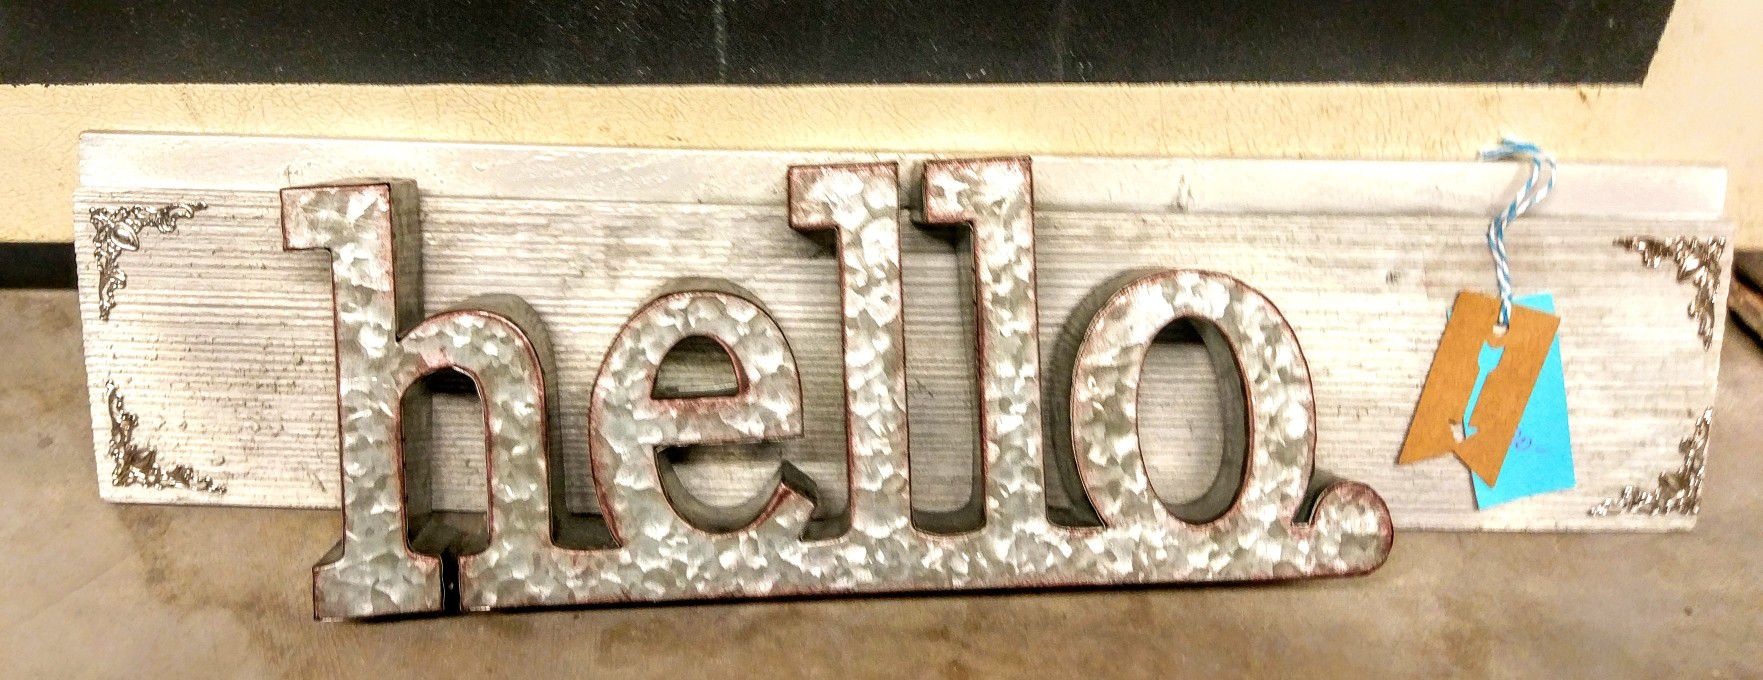 Metal Connected letters on wall decor